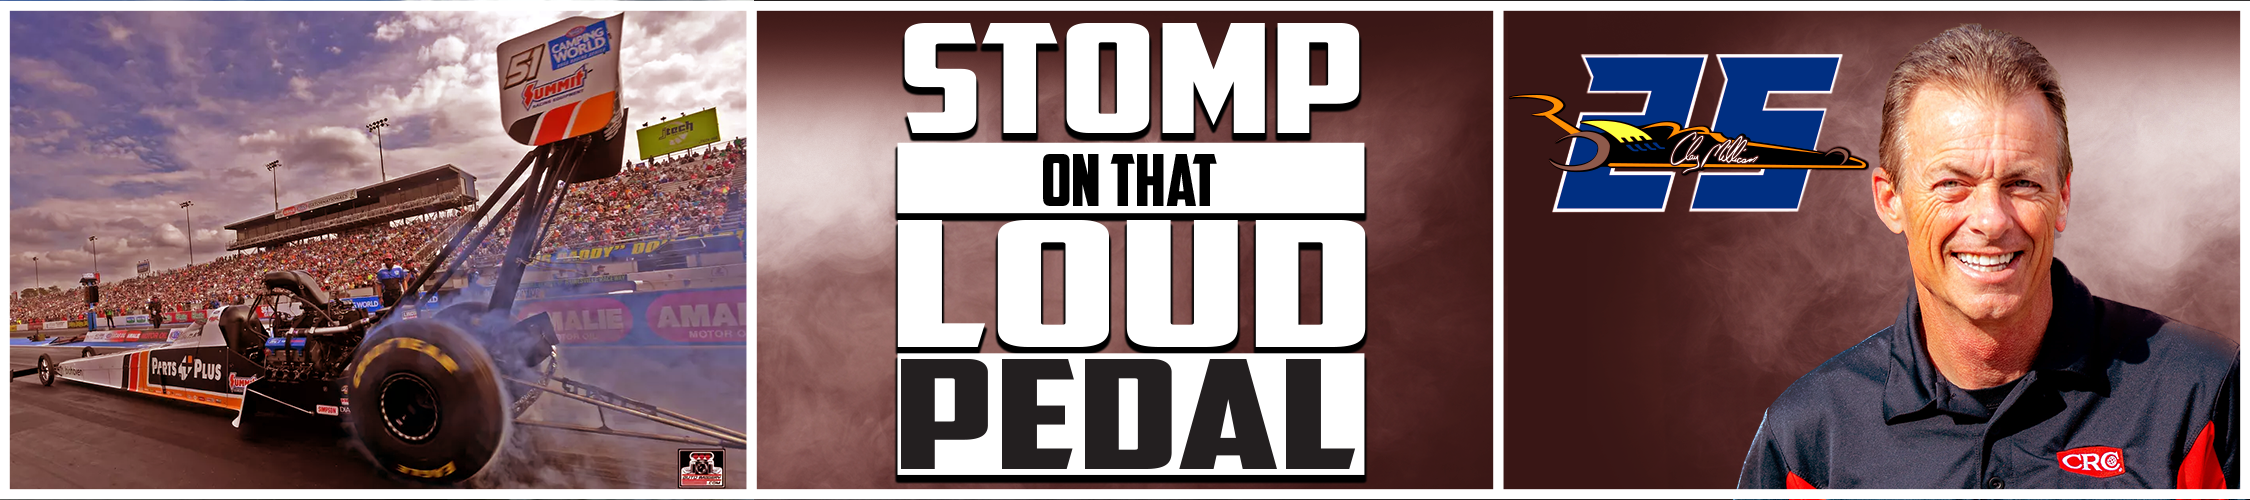 About Stomp On That Loud Pedal